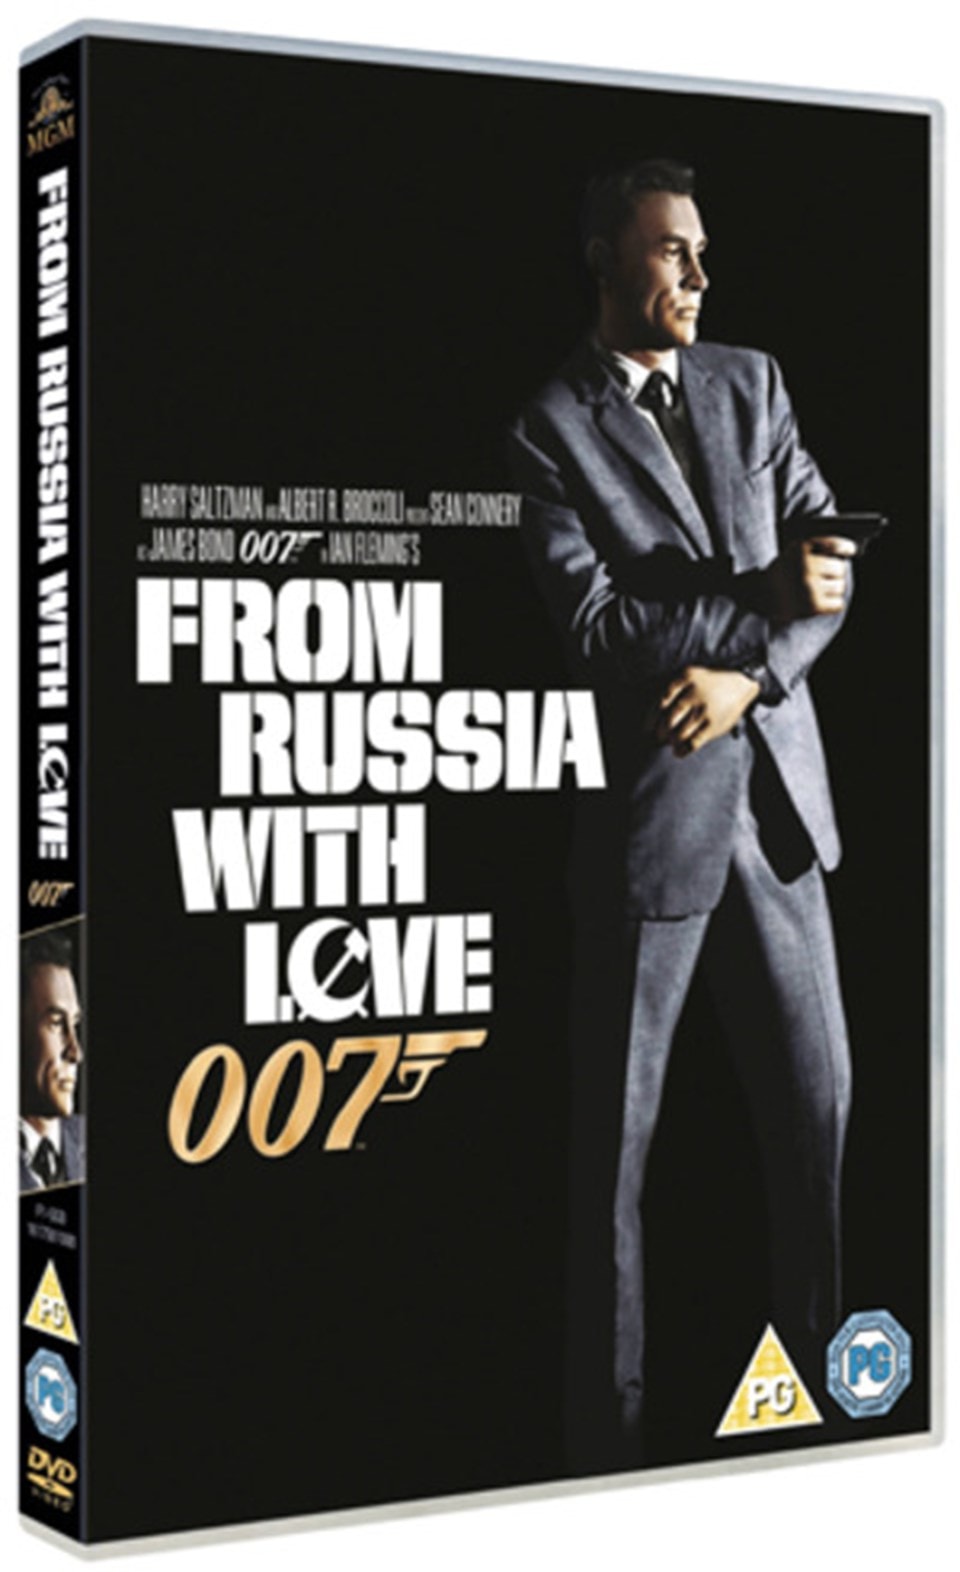 From Russia With Love | DVD | Free shipping over £20 | HMV Store